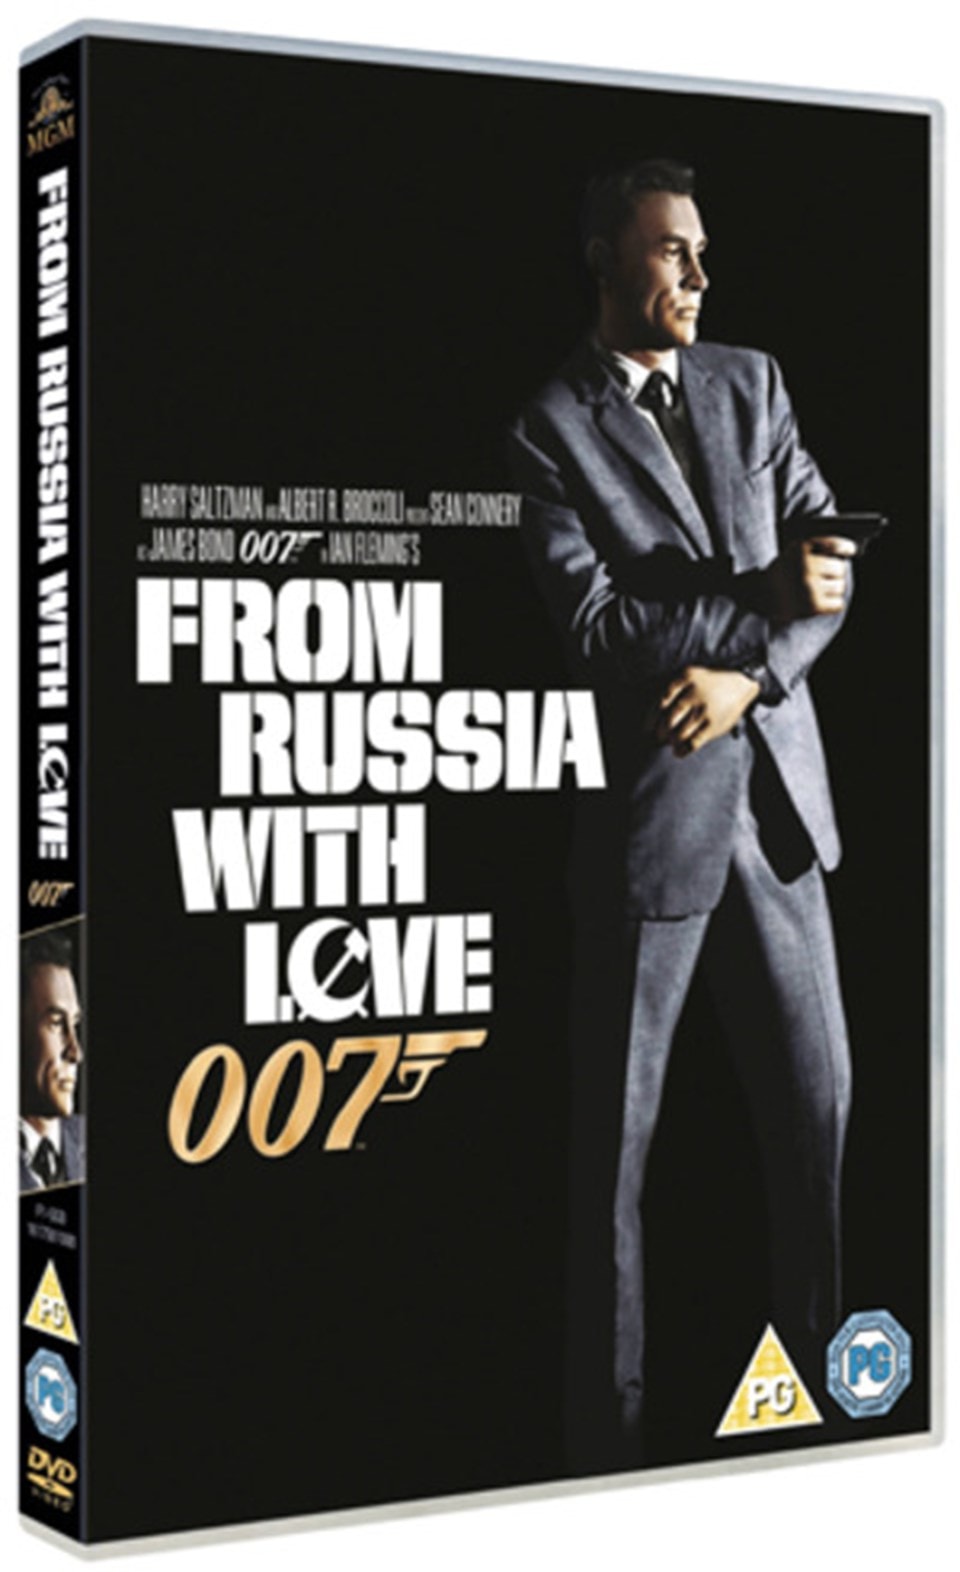 From Russia With Love | DVD | Free shipping over £20 | HMV Store